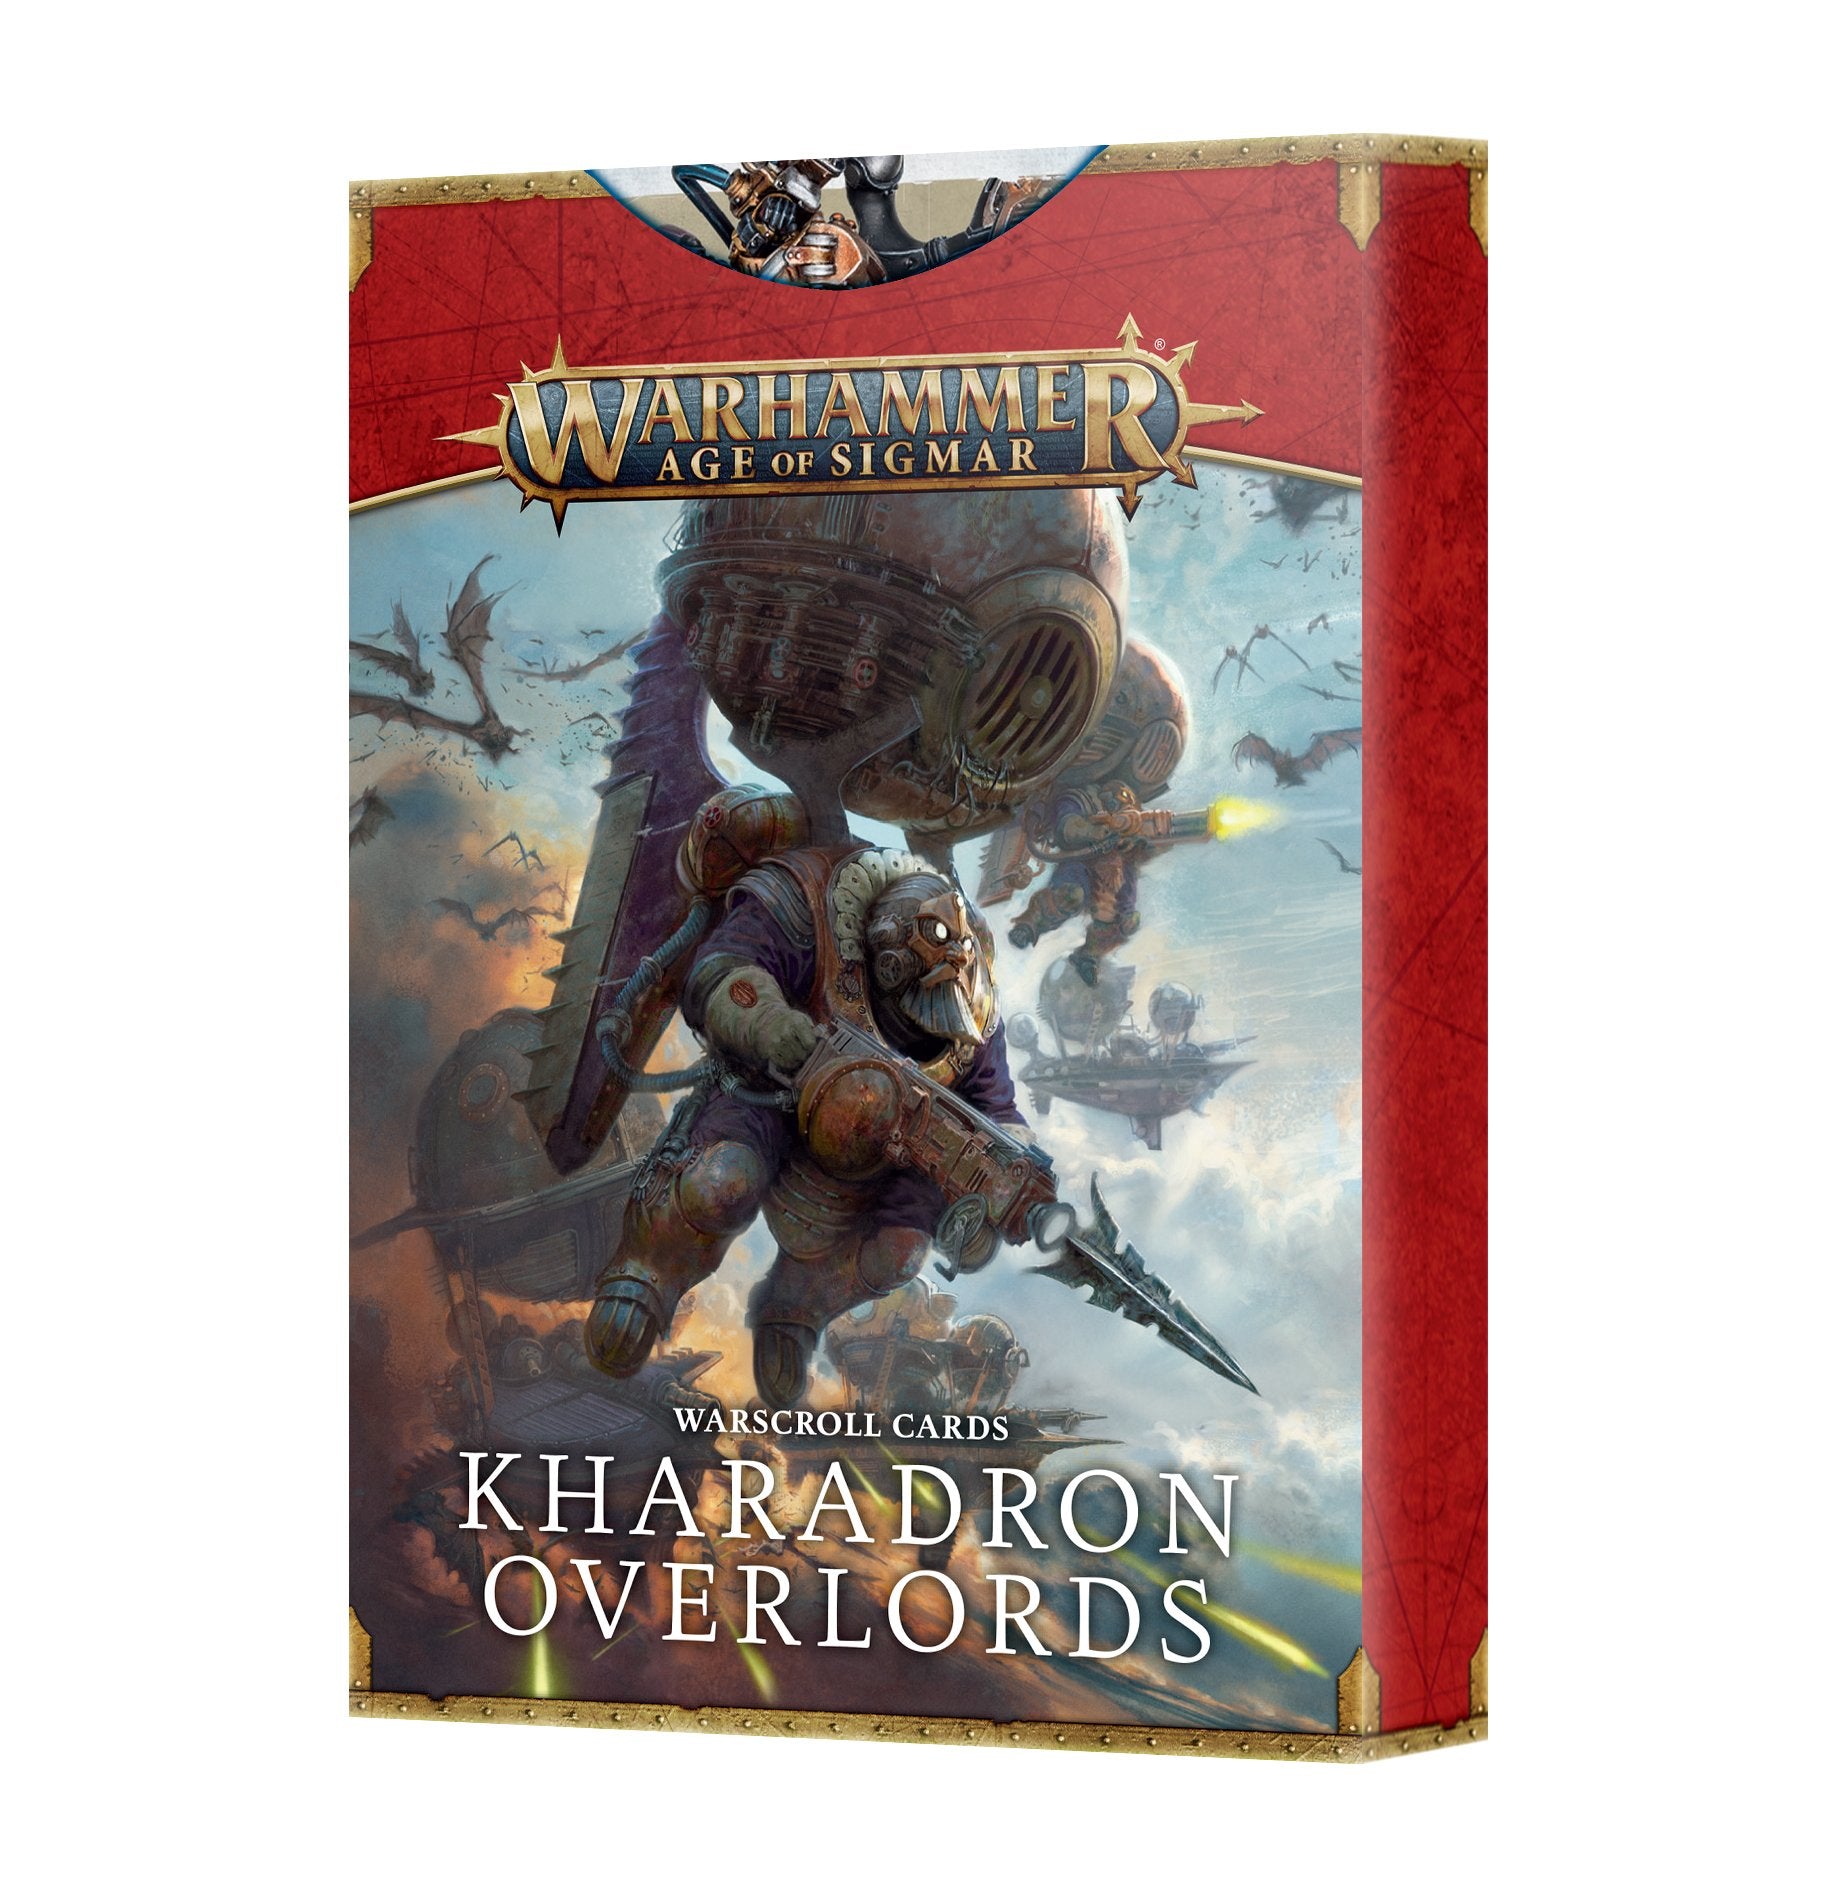 Kharadron-overlords-warscroll-cards-age-of-sigmar